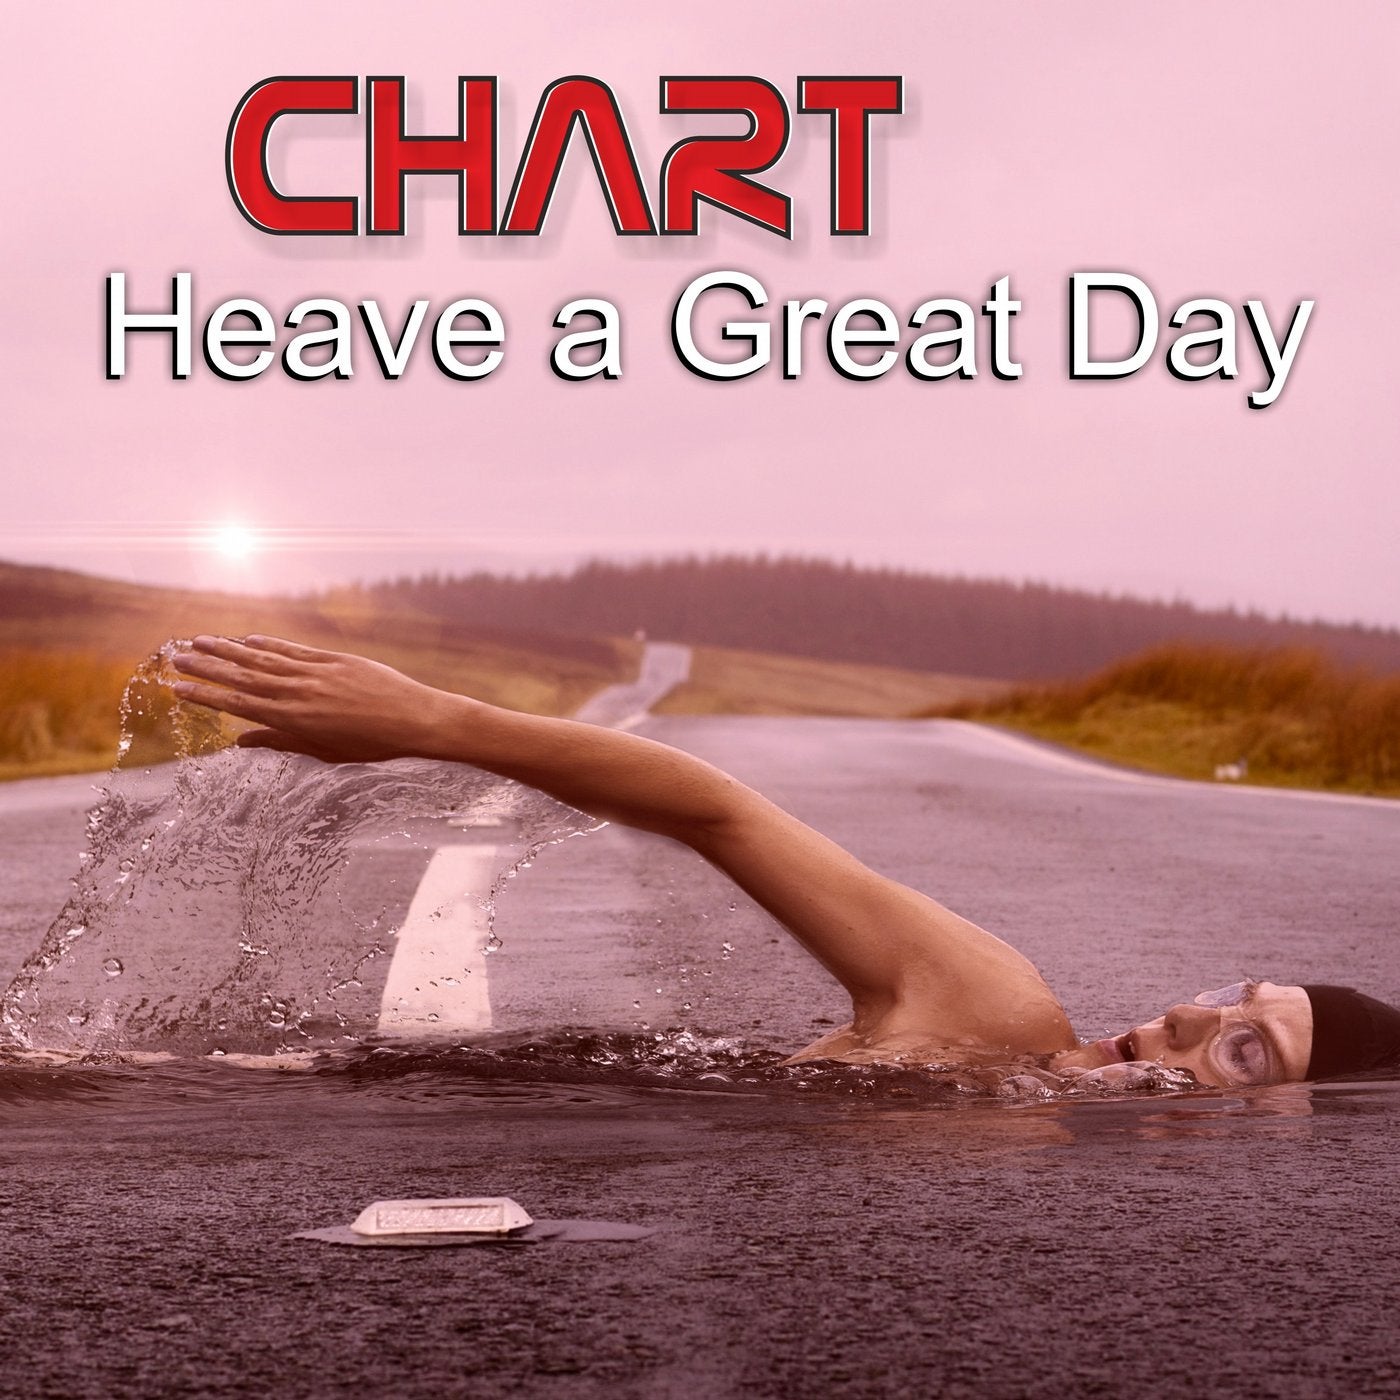 Chart: Heave a Great Day